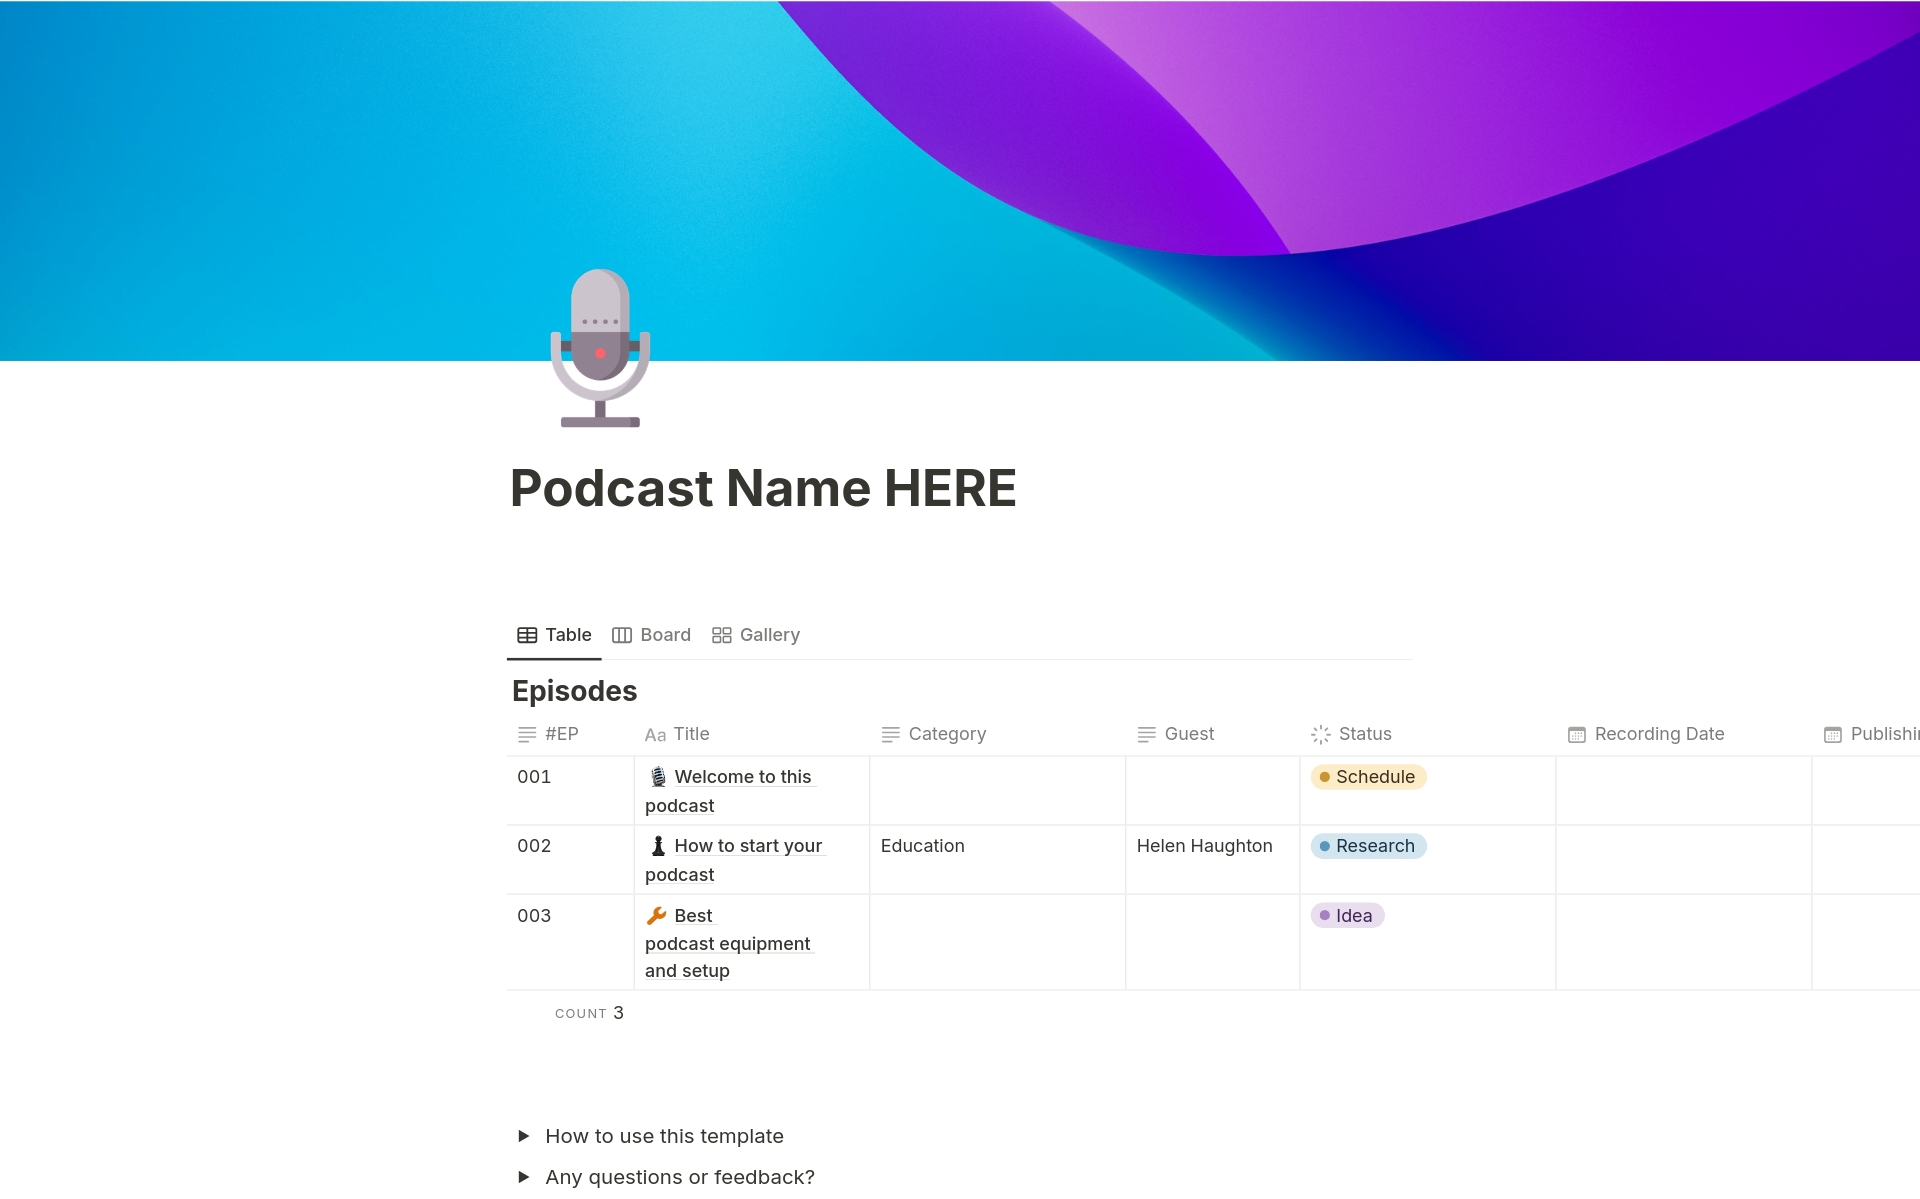 If you are a podcaster looking to save time and energy, you can now optimize the planning and tracking of your episodes with this template. Ensure seamless execution and consistent quality across all your podcast episodes.